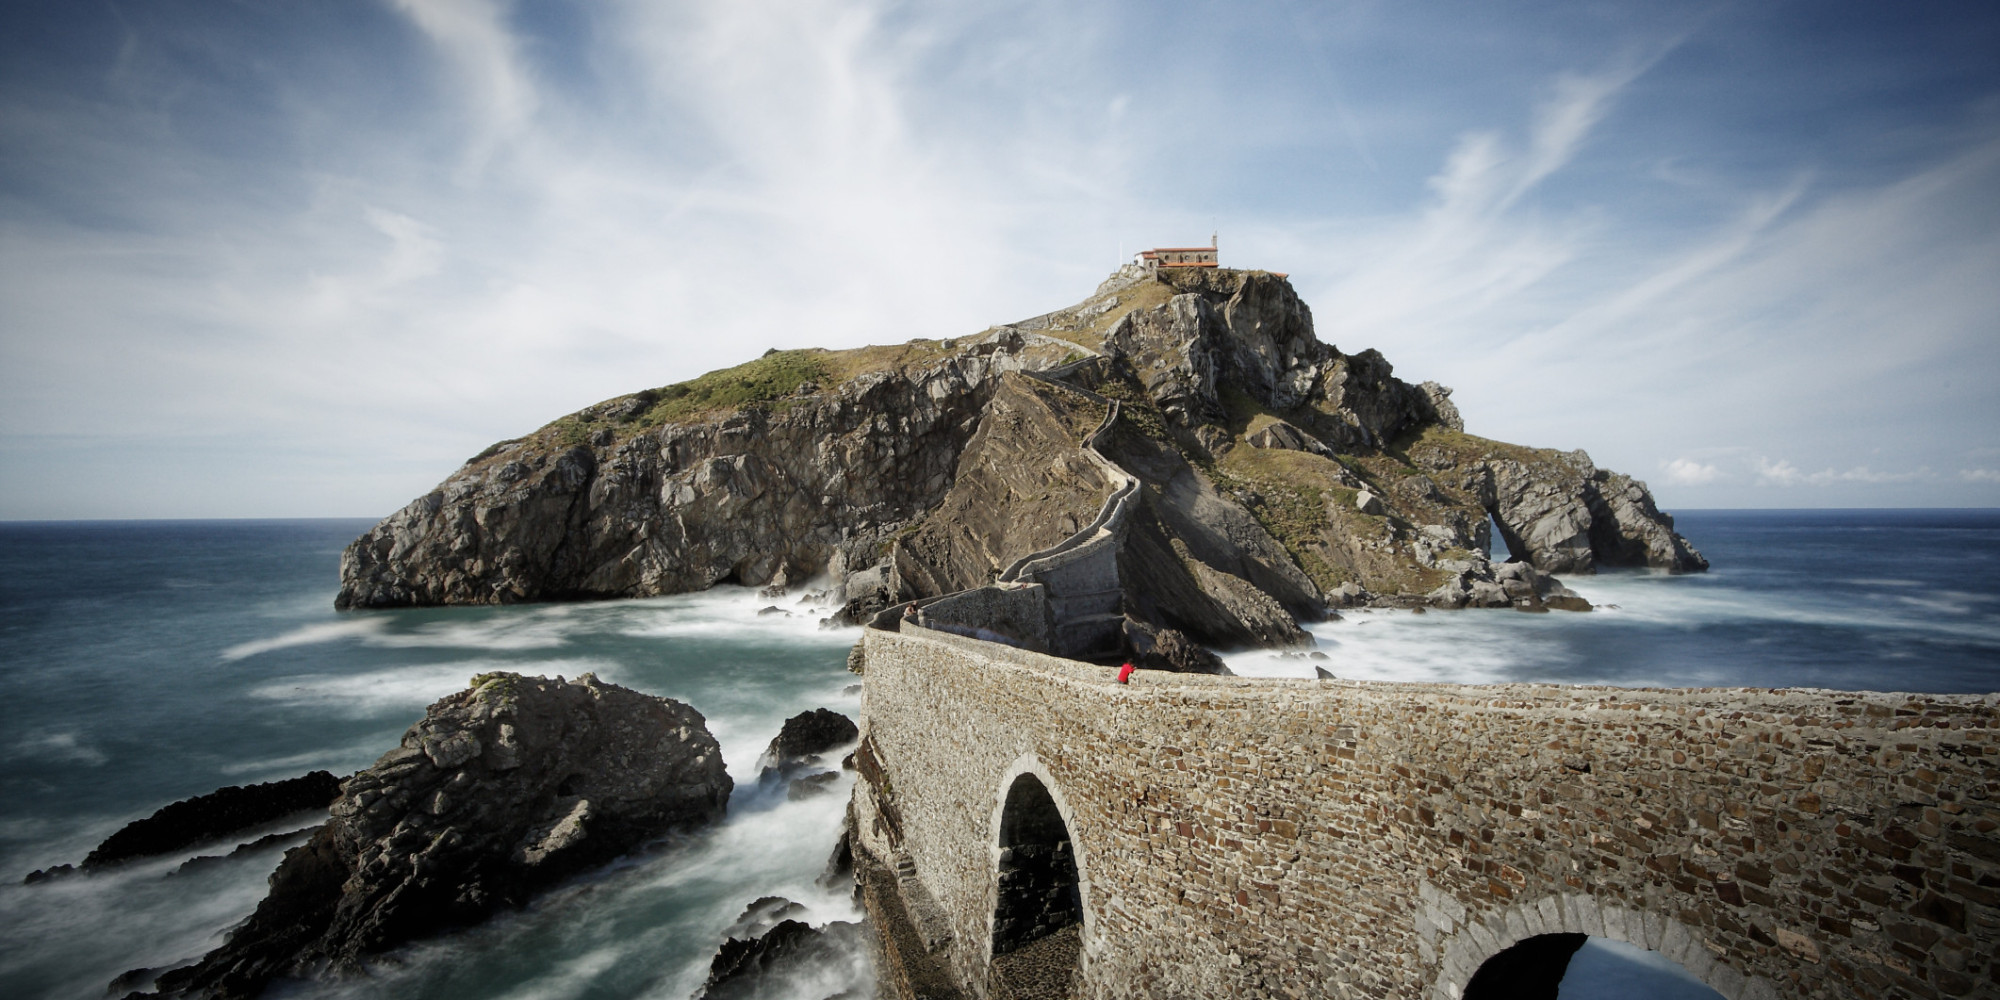 You Can Walk To This Rugged Spanish Islet